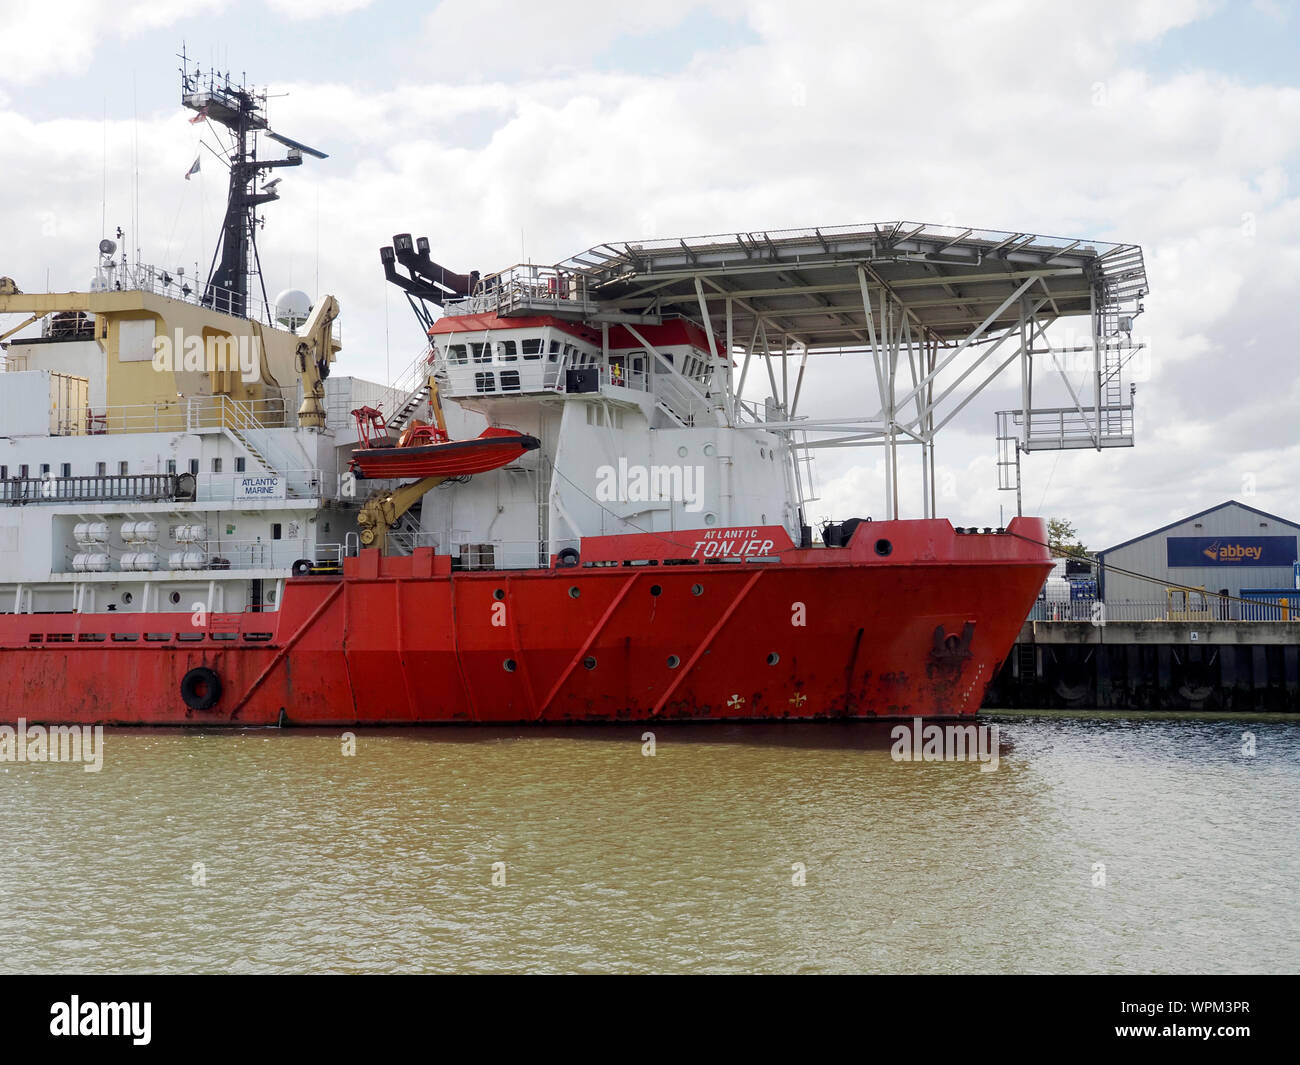 Bow, bridge and helipad of the Atlantic Tonjer, a multi-purpose supply vessel moored at Gorleston, Port of Great Yarmouth. Stock Photo